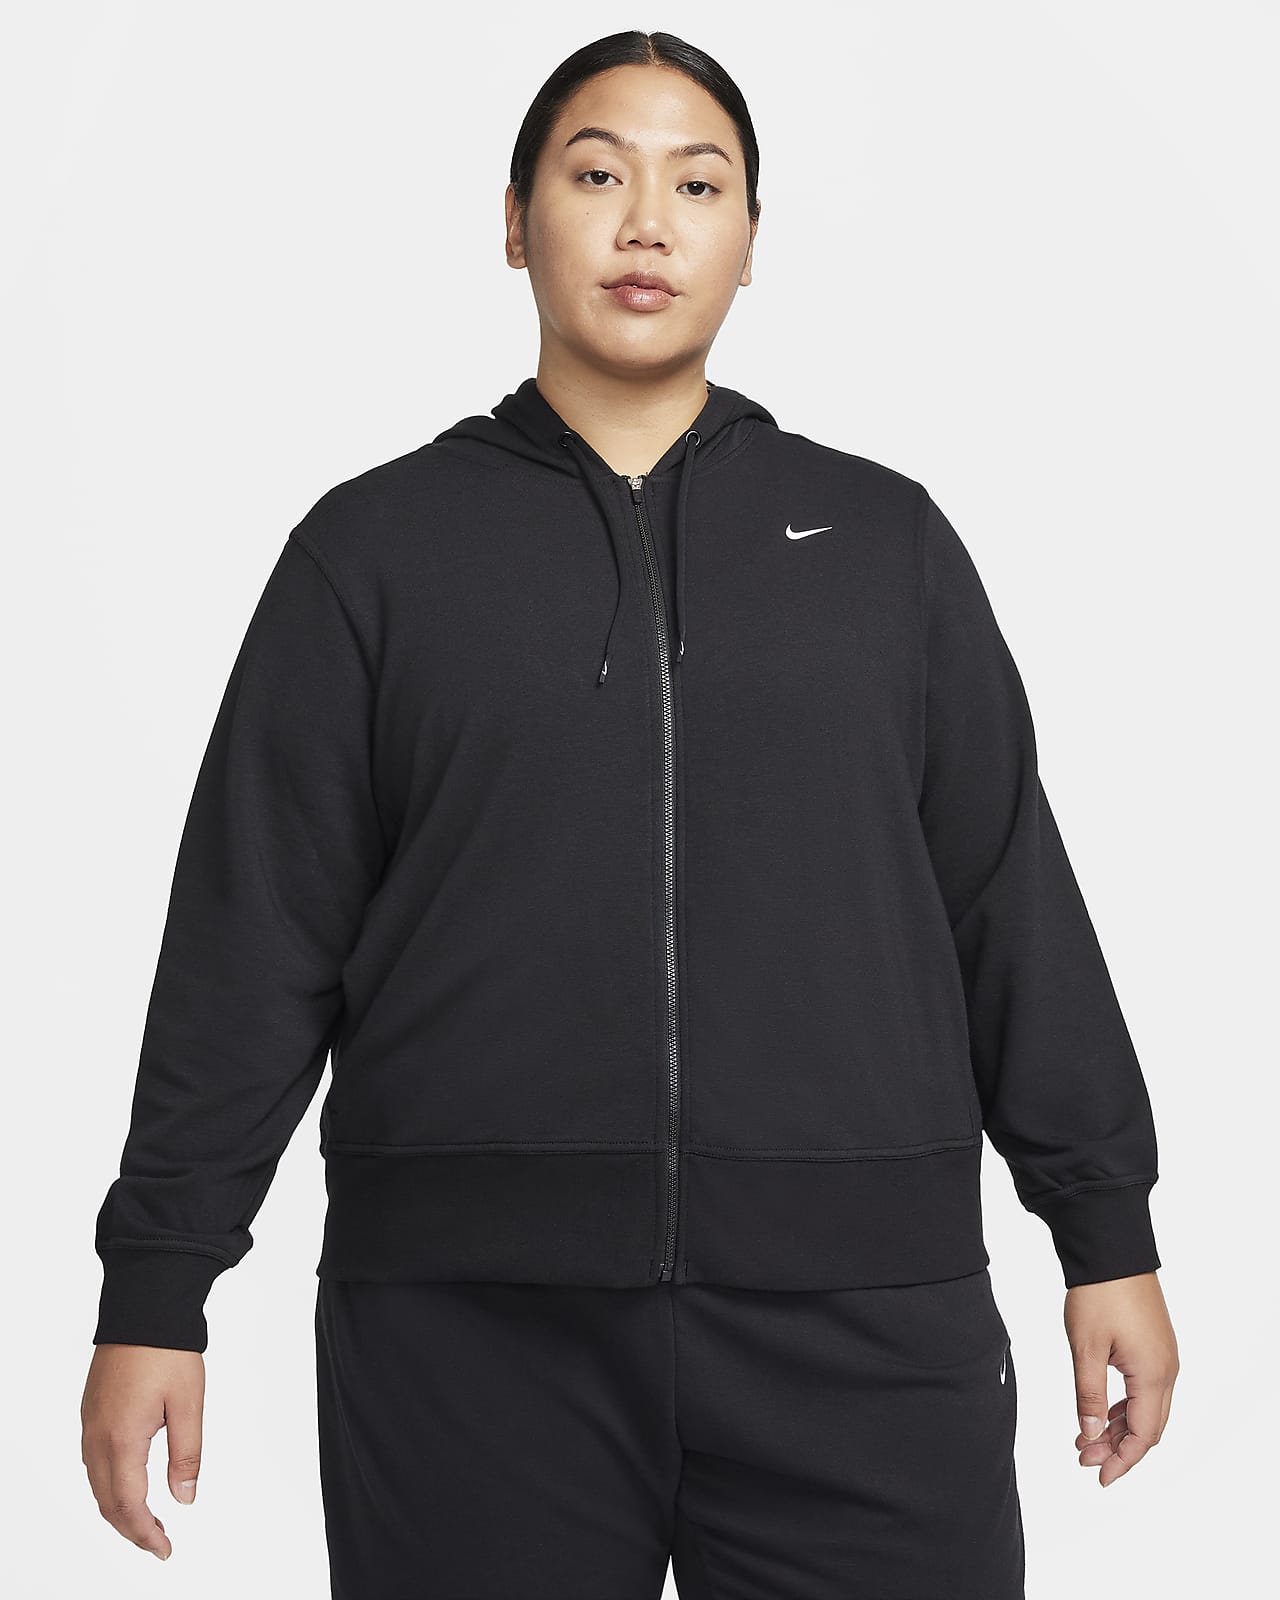 Nike Dri-FIT One Women's Full-Zip French Terry Hoodie (Plus Size)